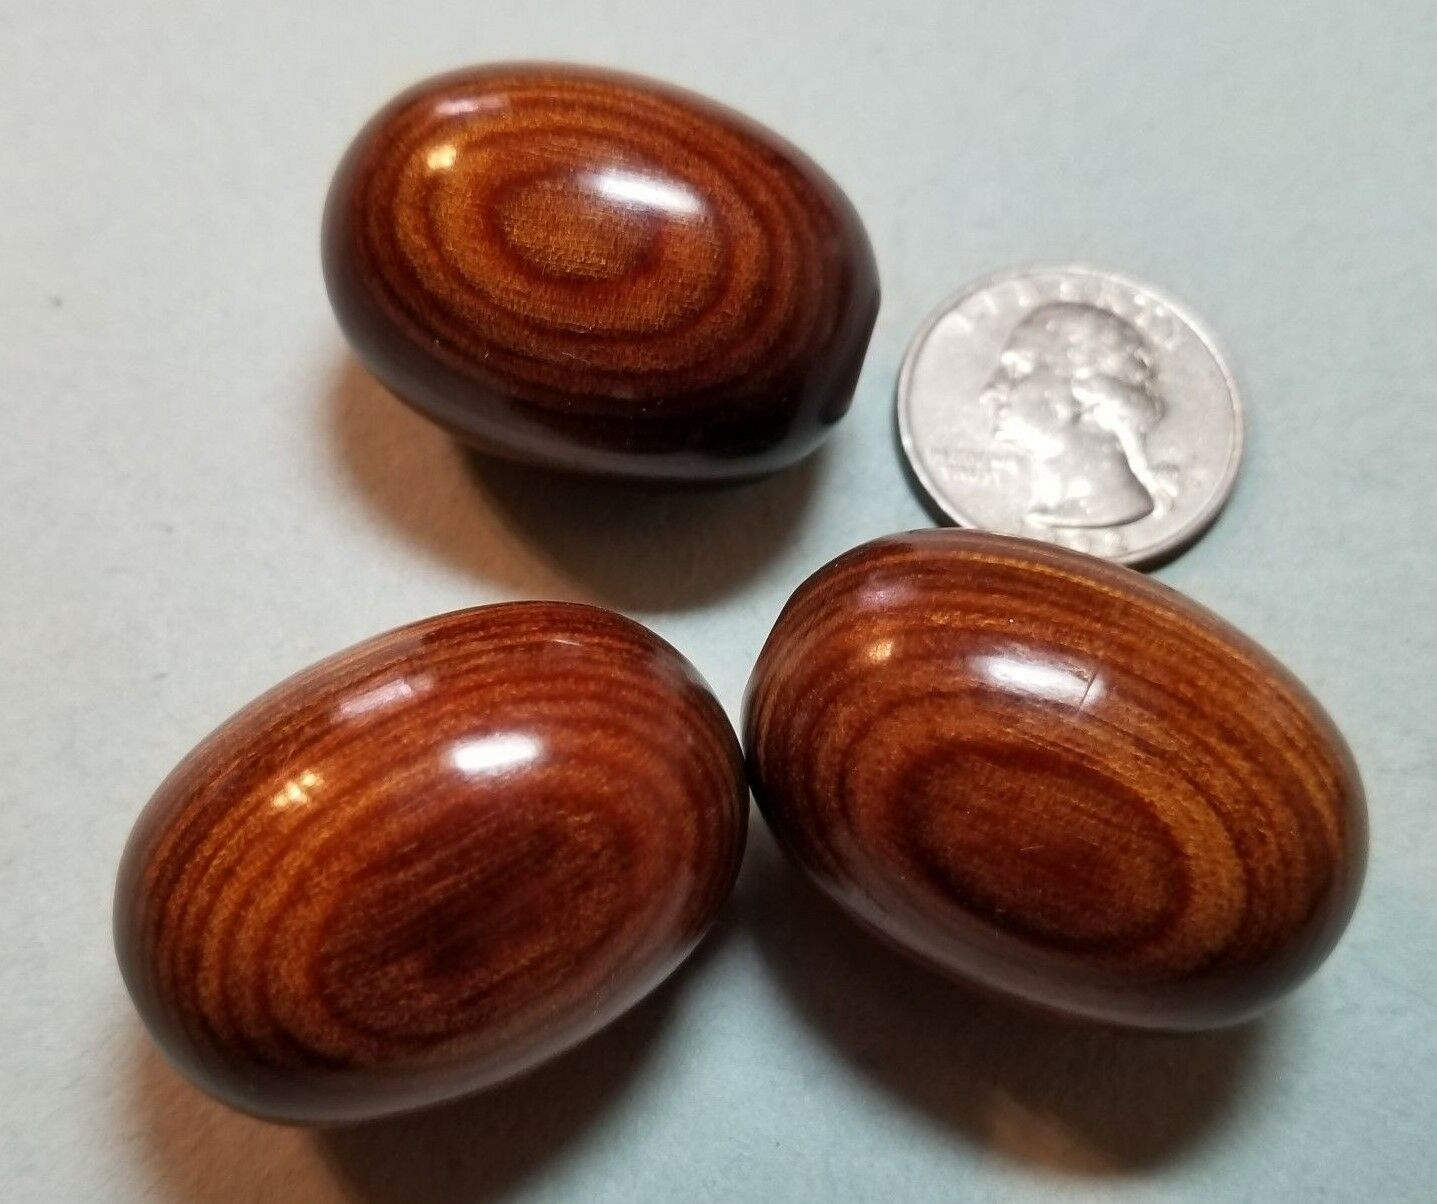 3 Very Large Laminated Wood Toggle Buttons - 1 3/8" Long - 1" Thick